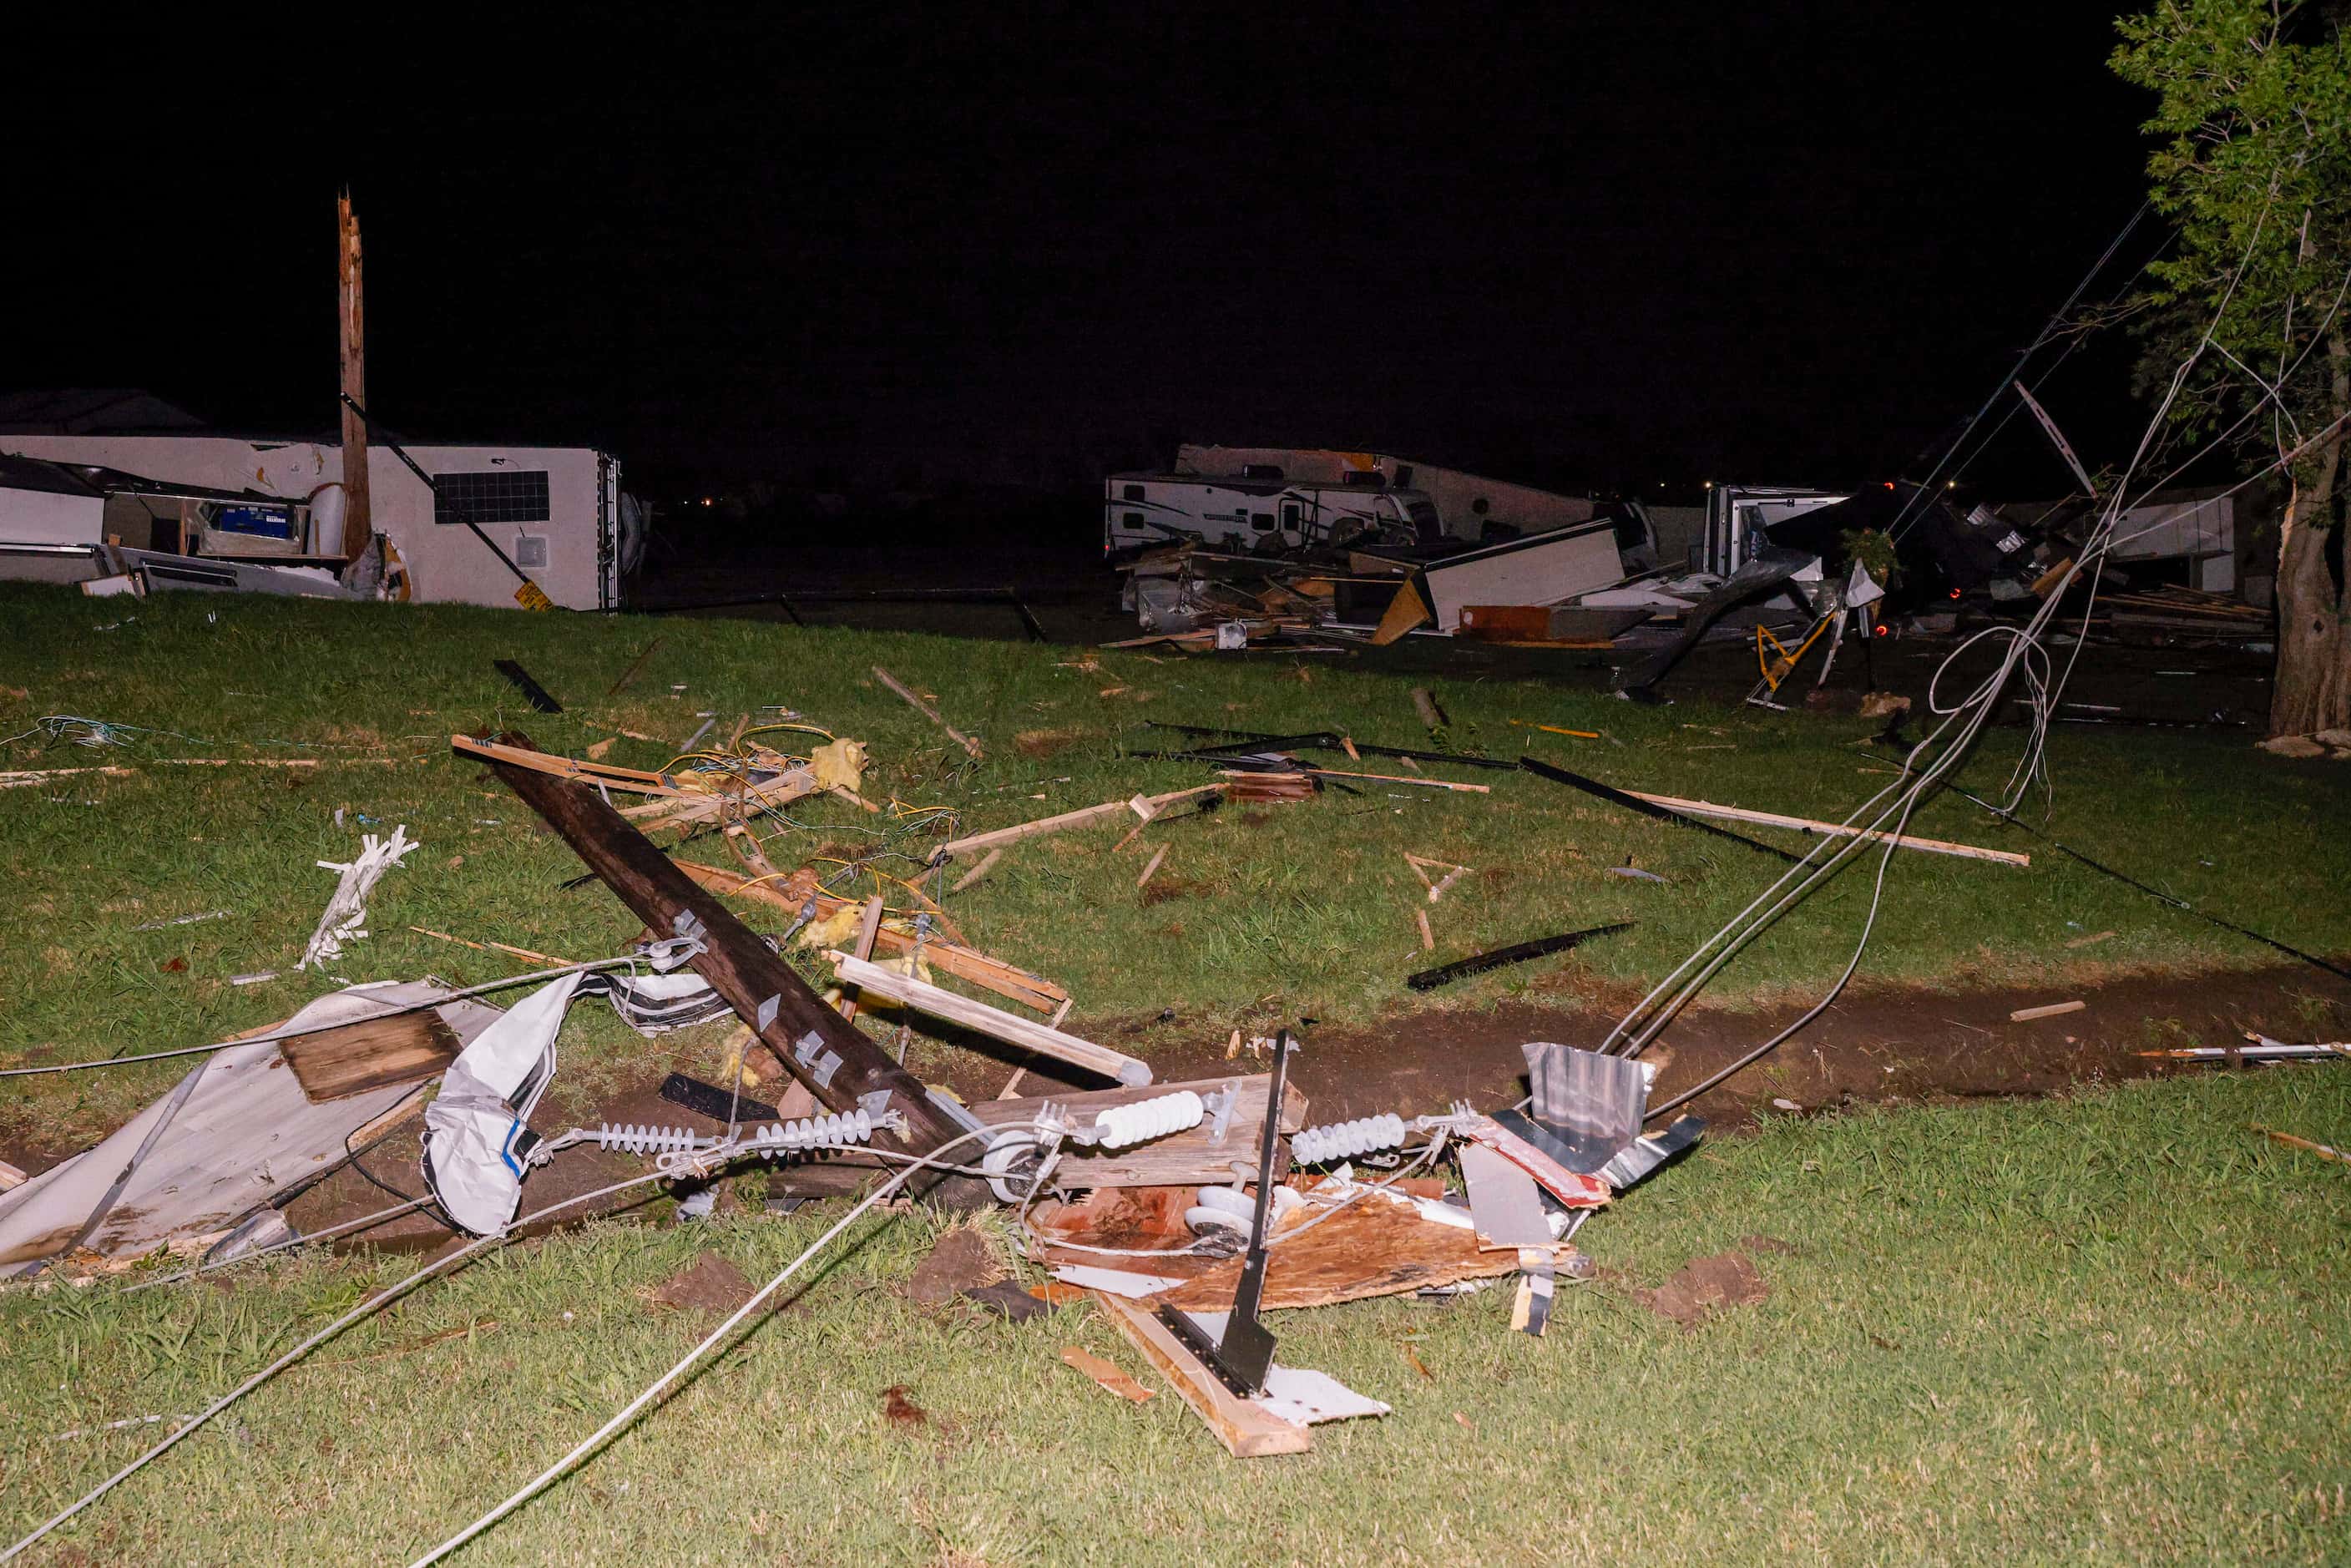 A mangled power line is seen near a recreational vehicle dealership after a suspected...